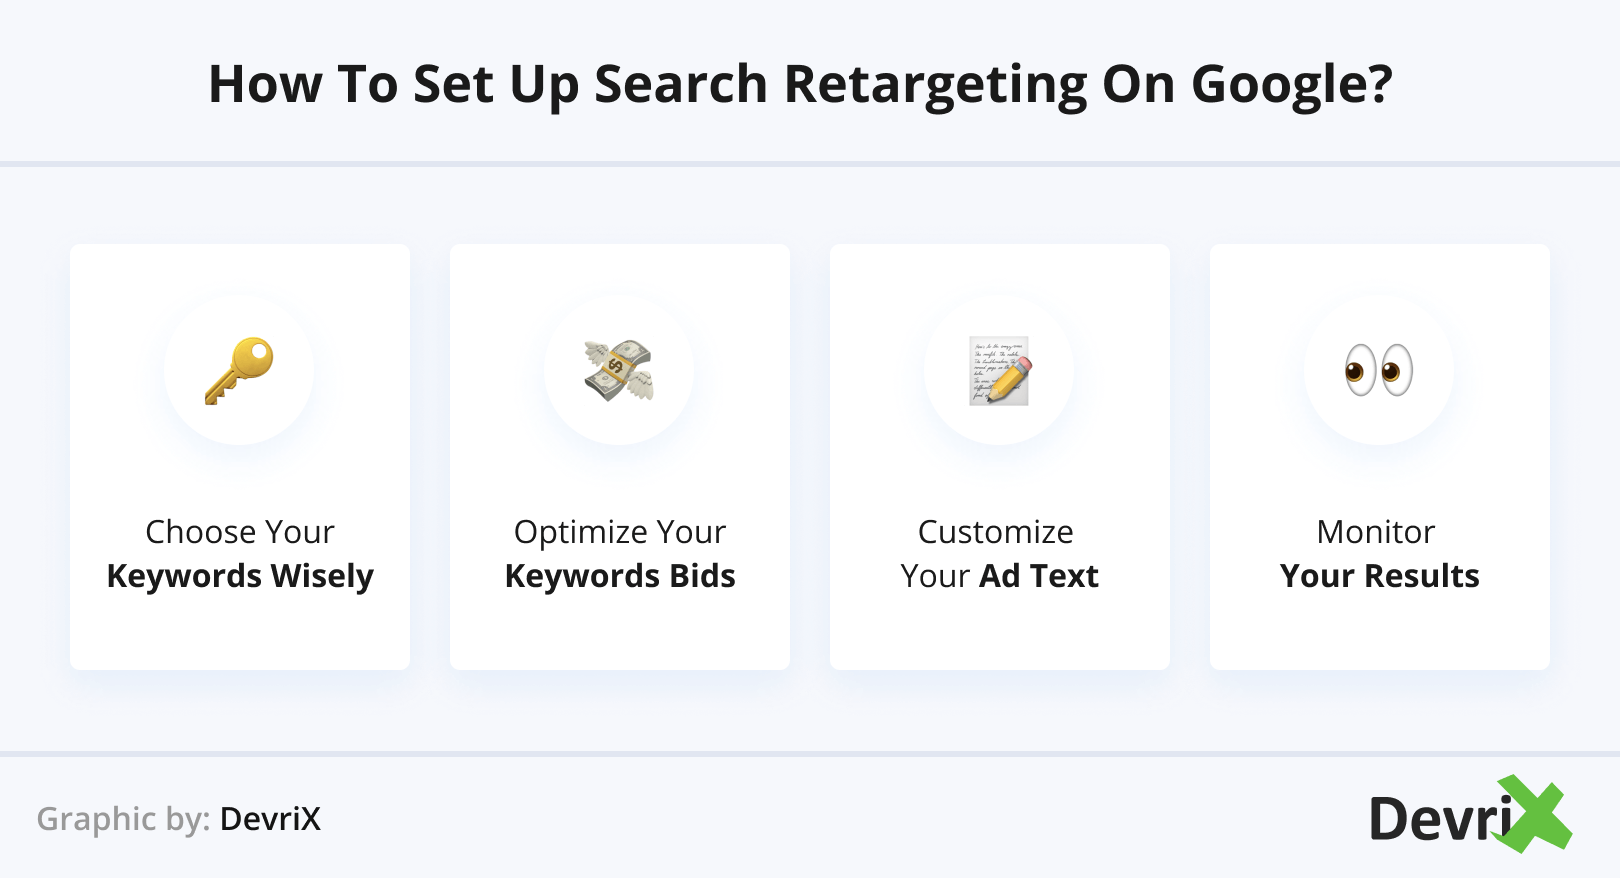 How to Set Up Search Retargeting on Google